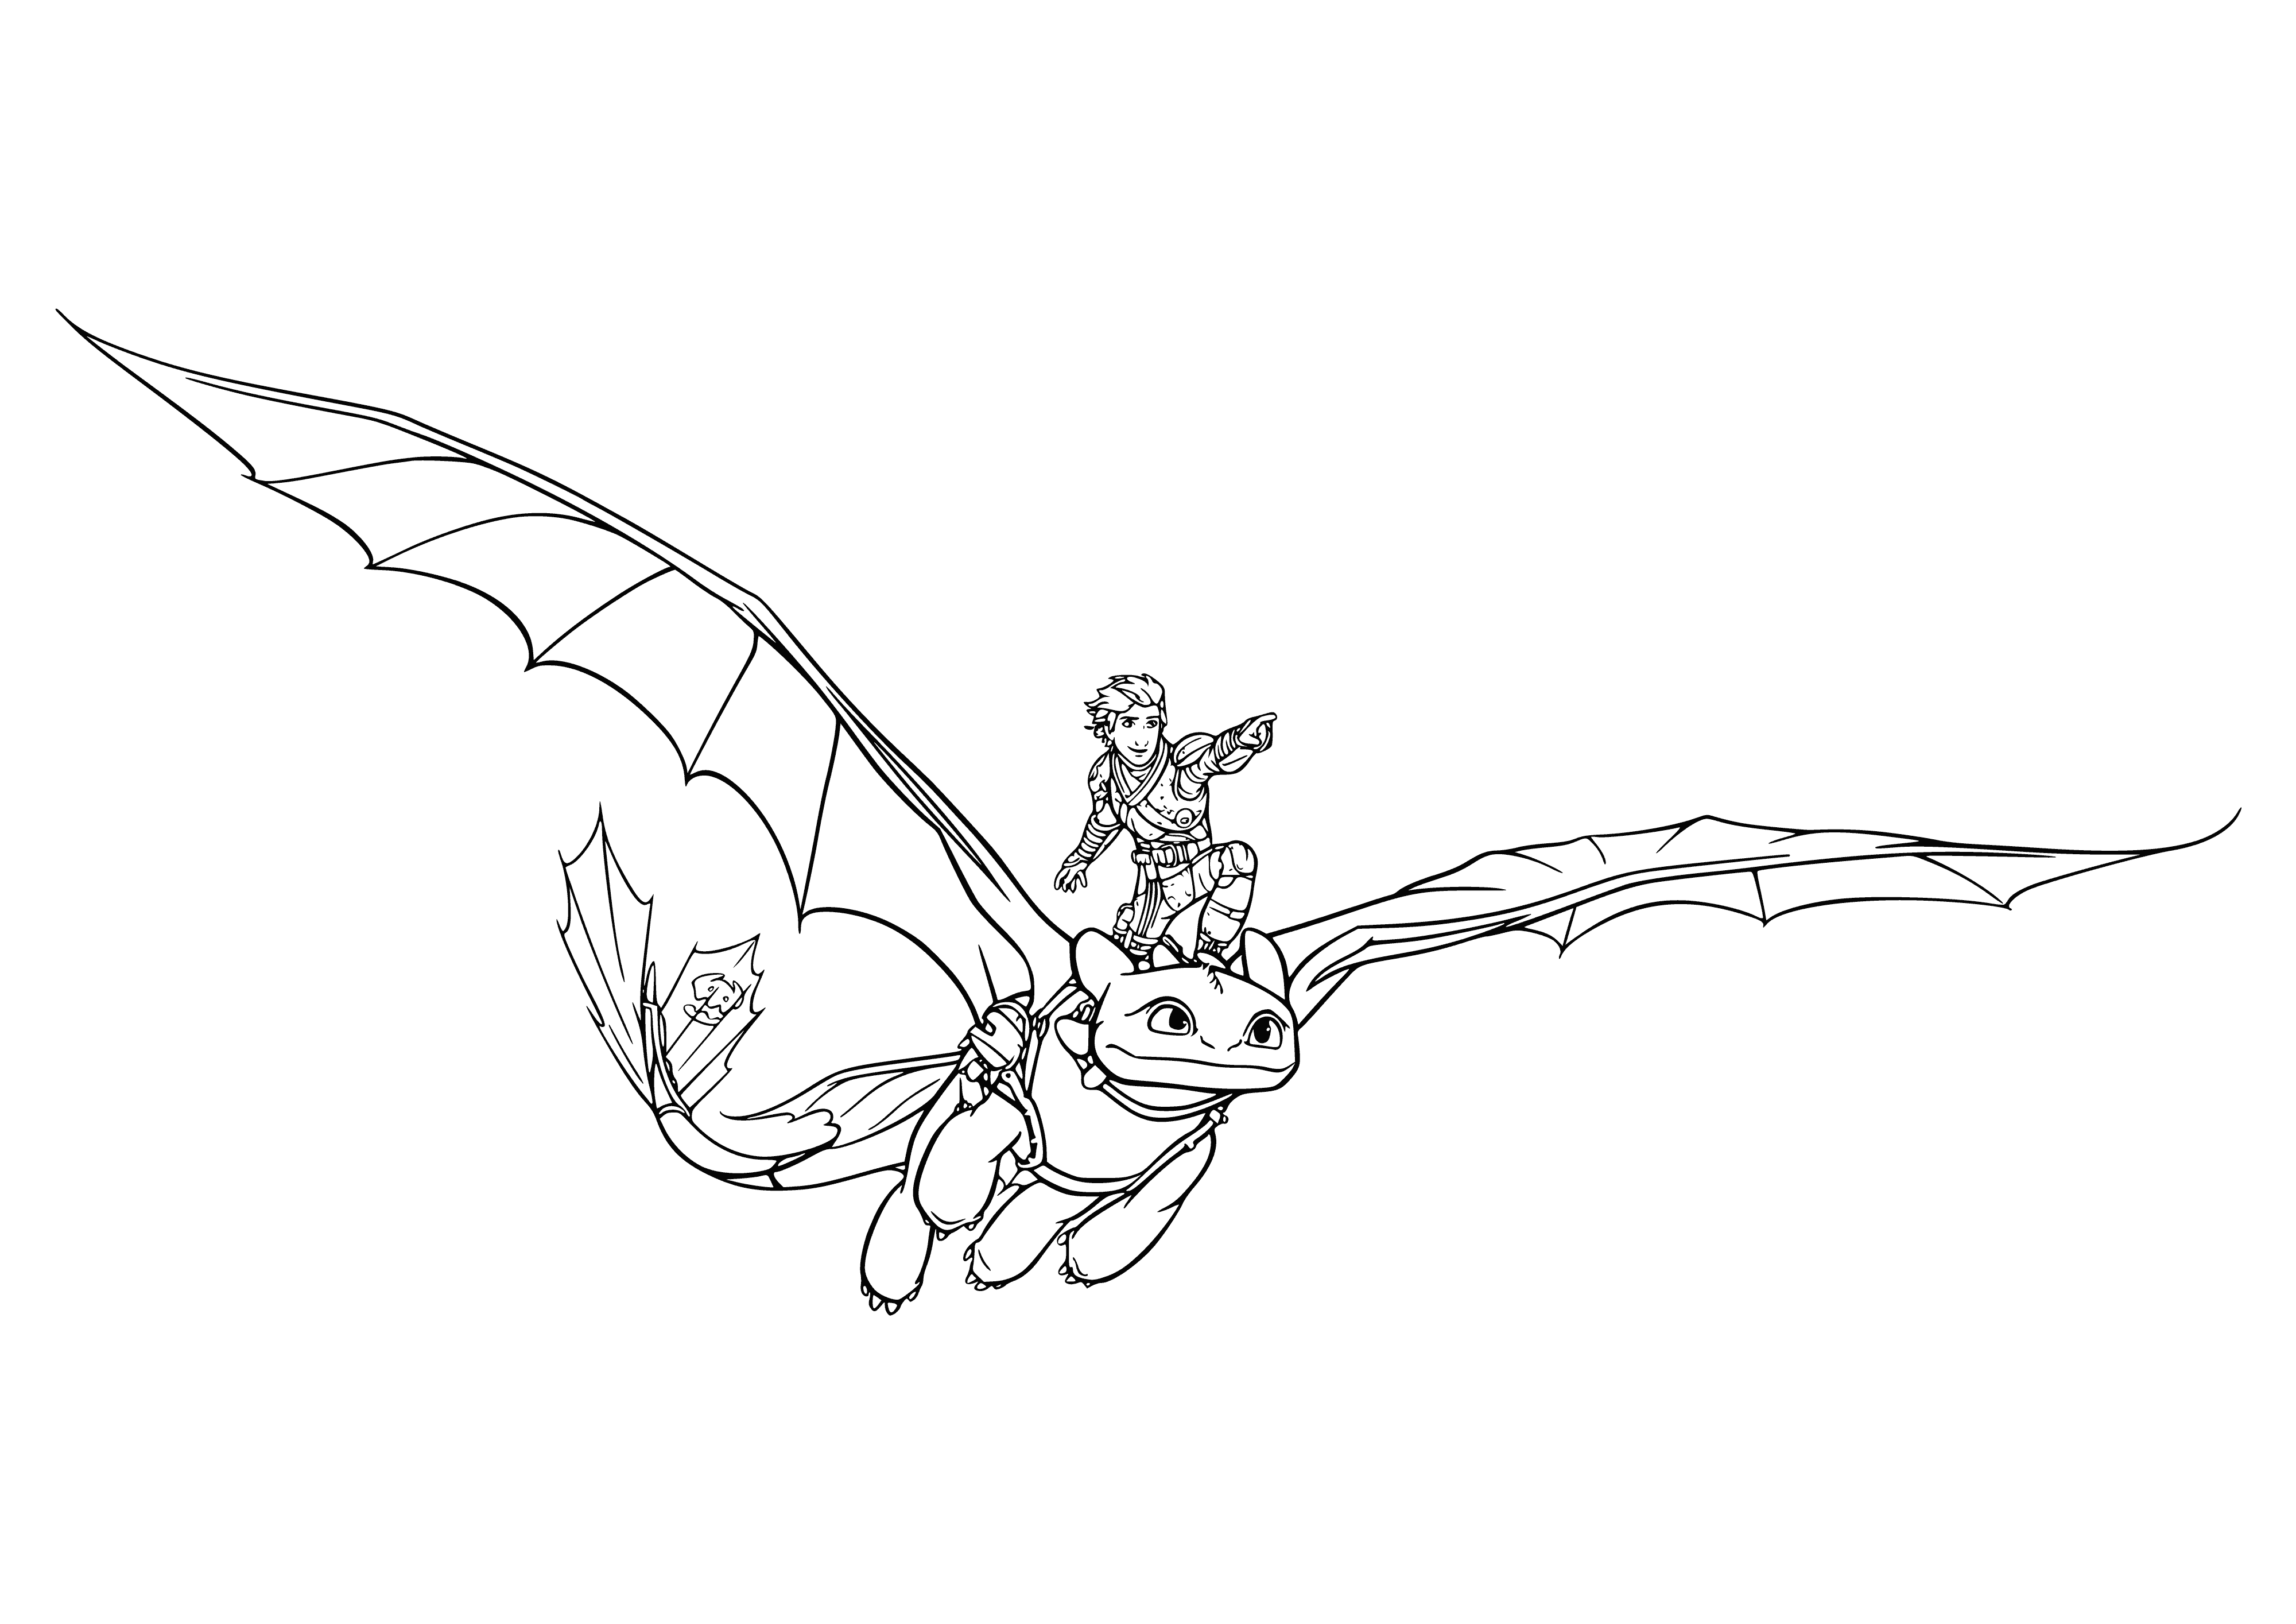 coloring page: Hiccup is smiling while flying on Toothless, a dragon, with a helmet and reins. #HTTYD2 #HowToTrainYourDragon2